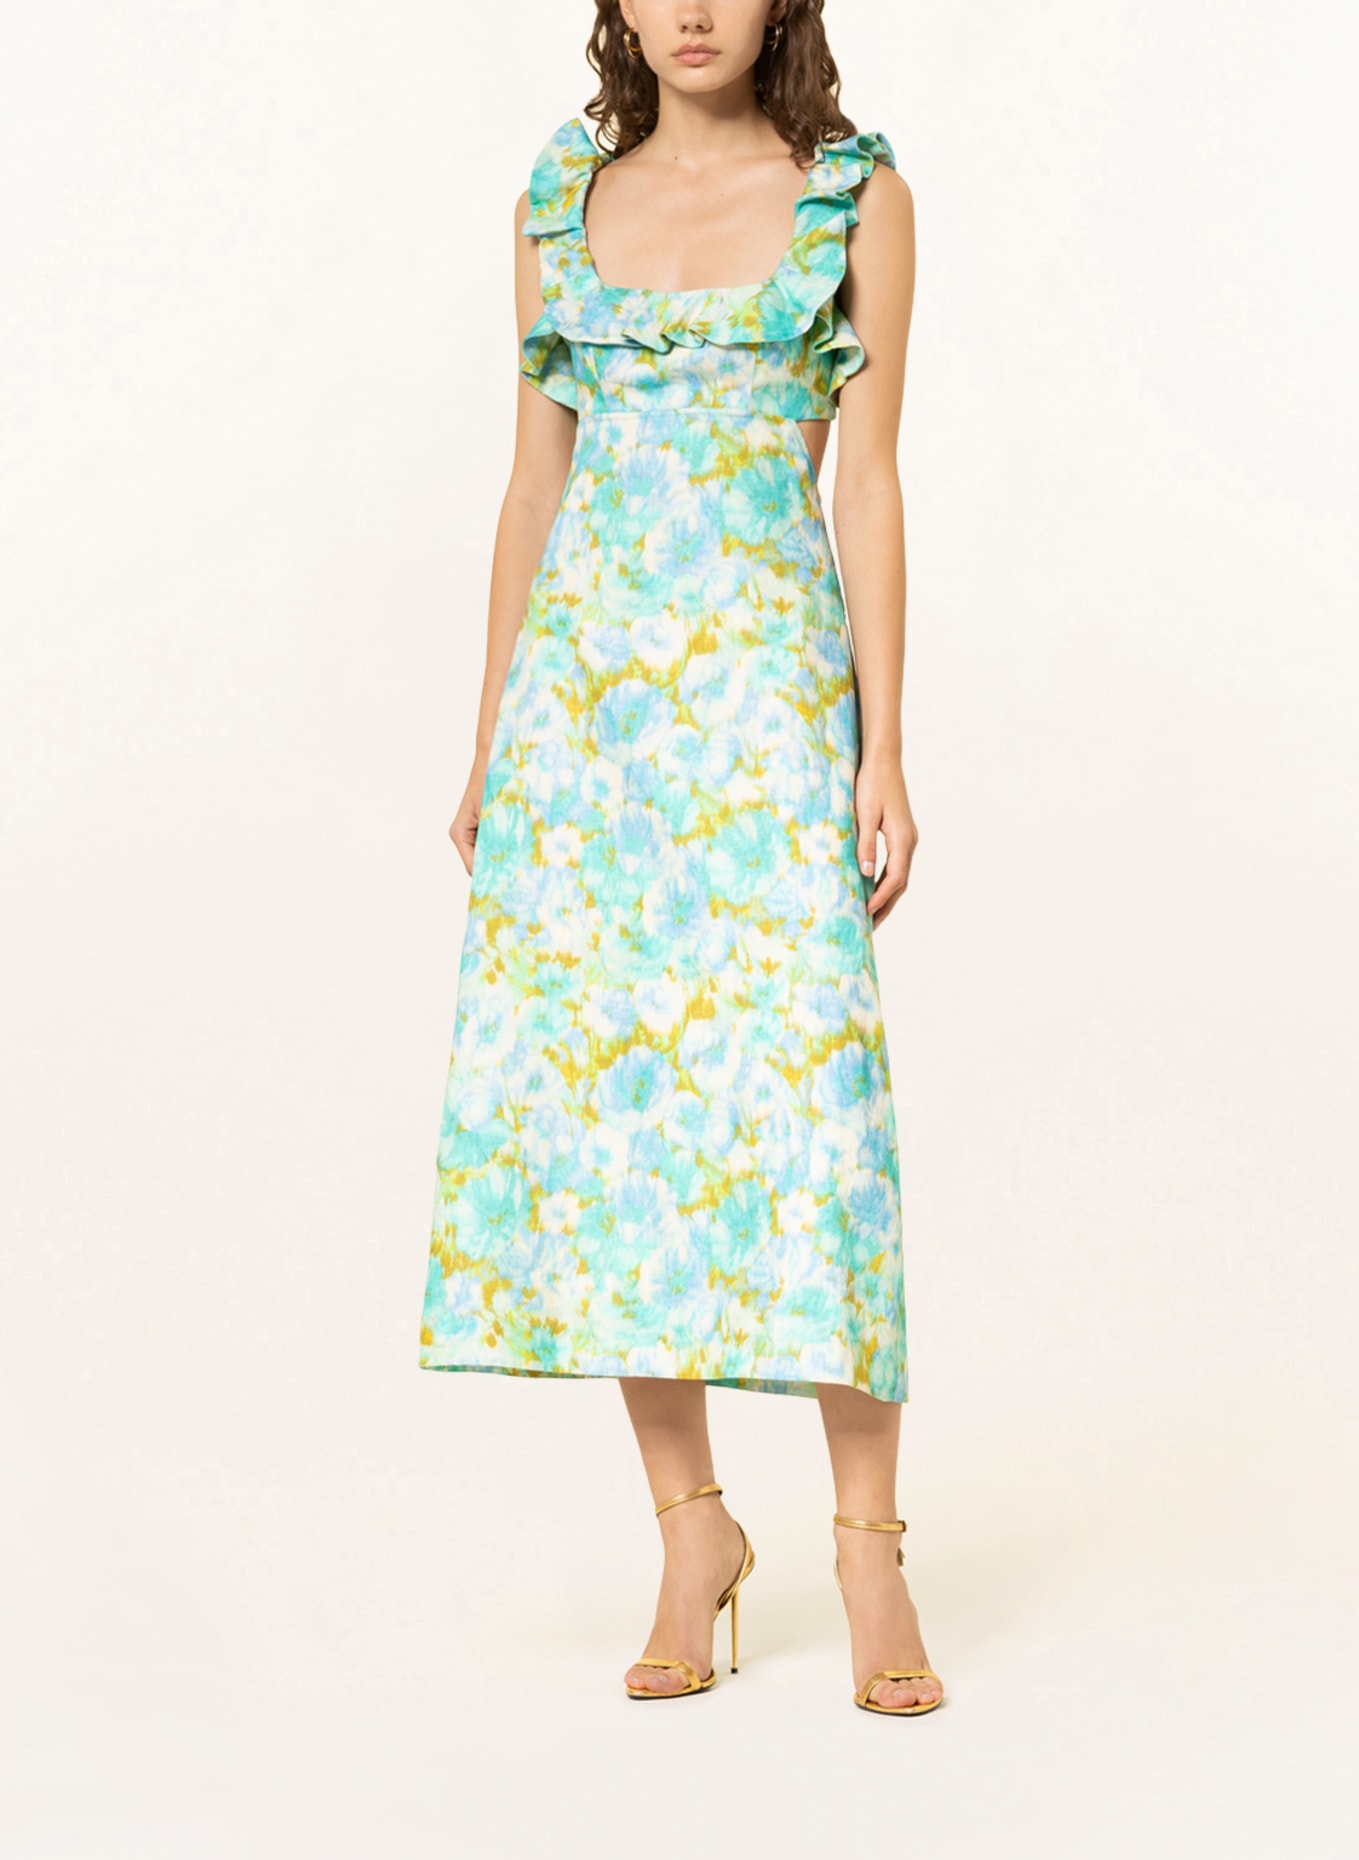 ZIMMERMANN Linen dress HIGH TIDE with frills, Color: NEON TURQUOISE/ LIGHT BLUE/ DARK YELLOW (Image 2)